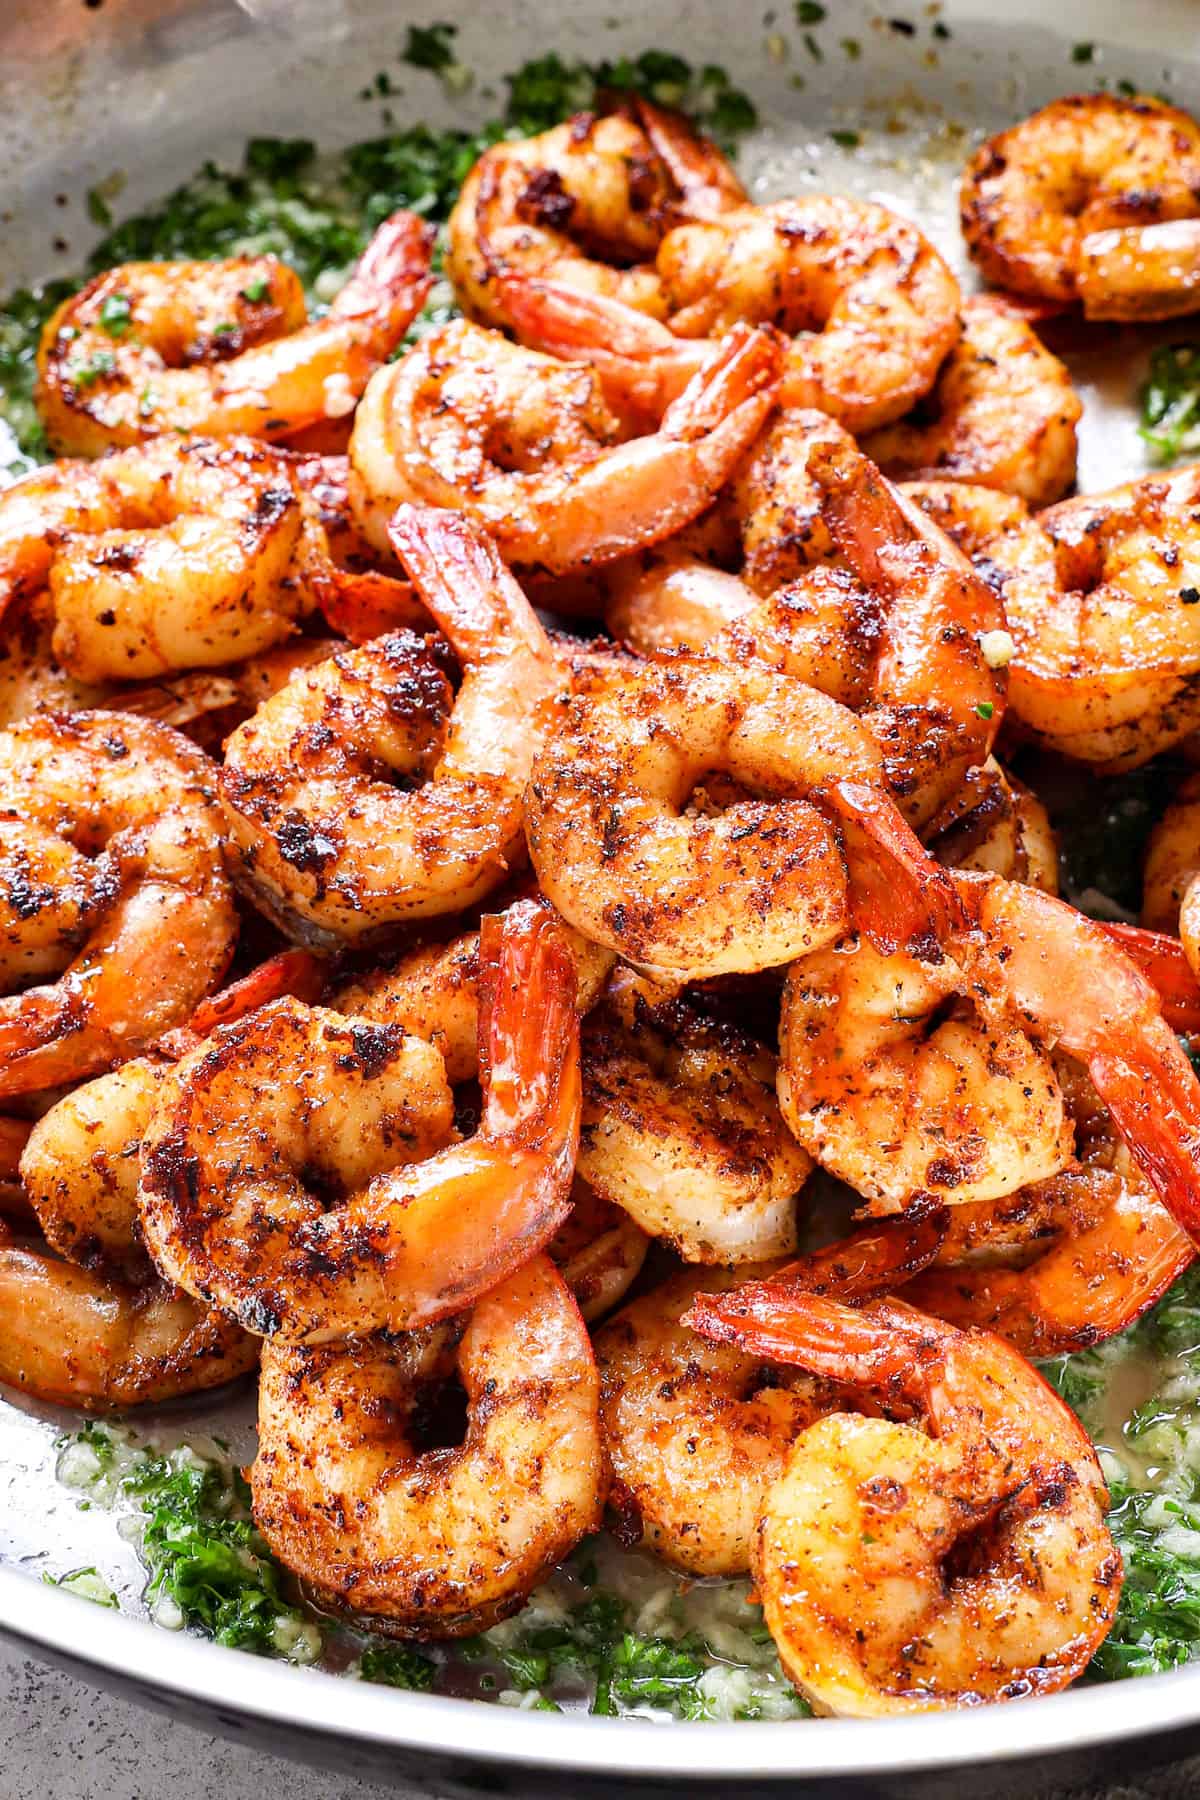 Cajun Shrimp recipe being cooked on the stove